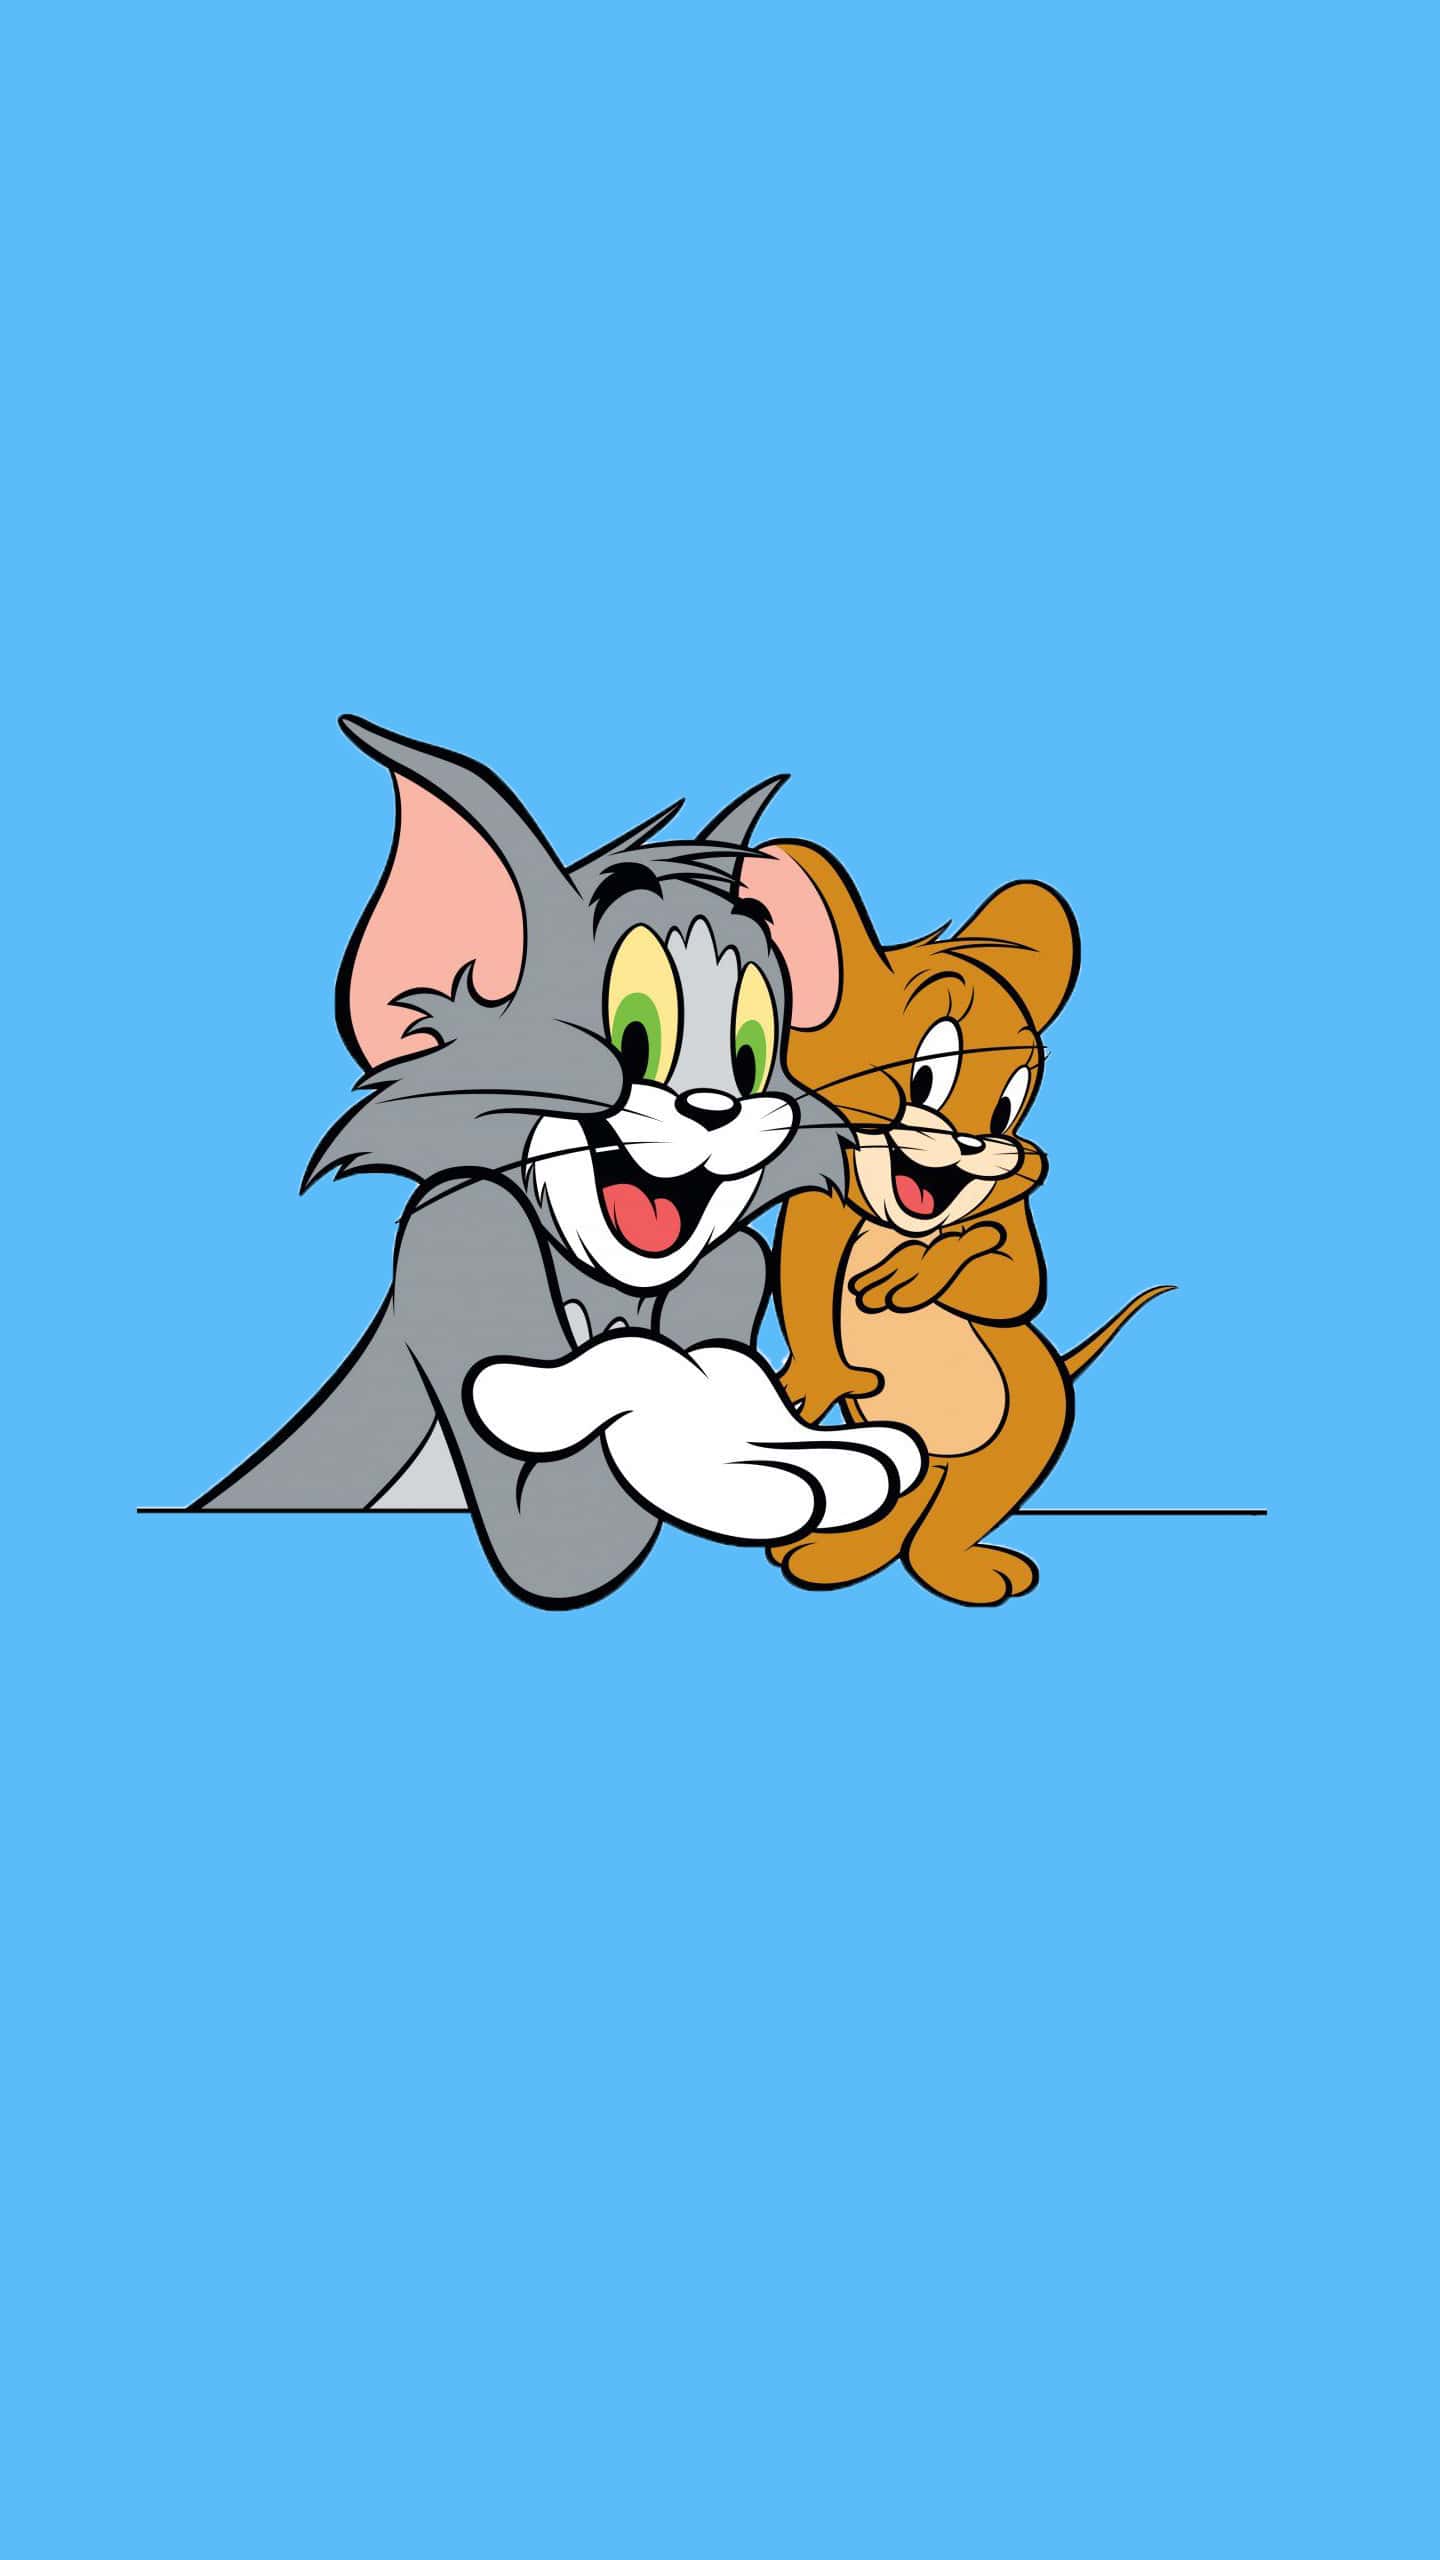 Free download HD WALLPAPERS Tom and Jerry cartoon hd wallpapers [1024x768]  for your Desktop, Mobile & Tablet | Explore 46+ New HD Cartoon Wallpapers |  Hd New Wallpaper, Hd Cartoon Wallpaper, Cartoon